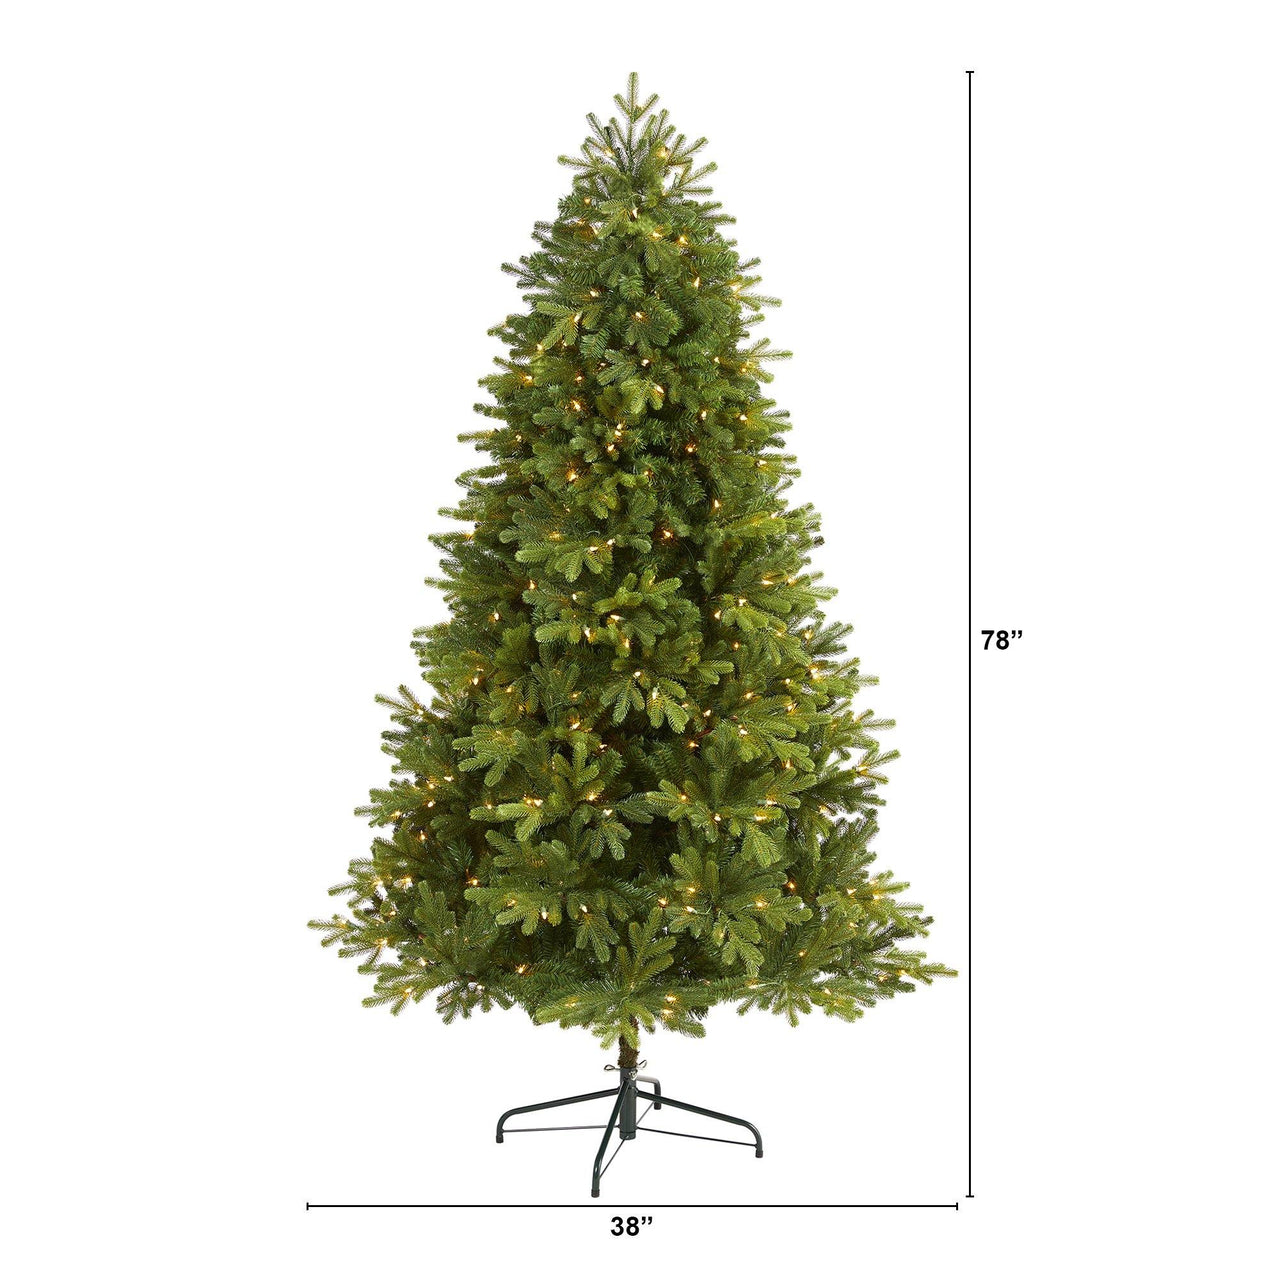 6.5’ Washington Fir Artificial Christmas Tree with 400 Clear Lights and 1110 Bendable Branches - The Fox Decor